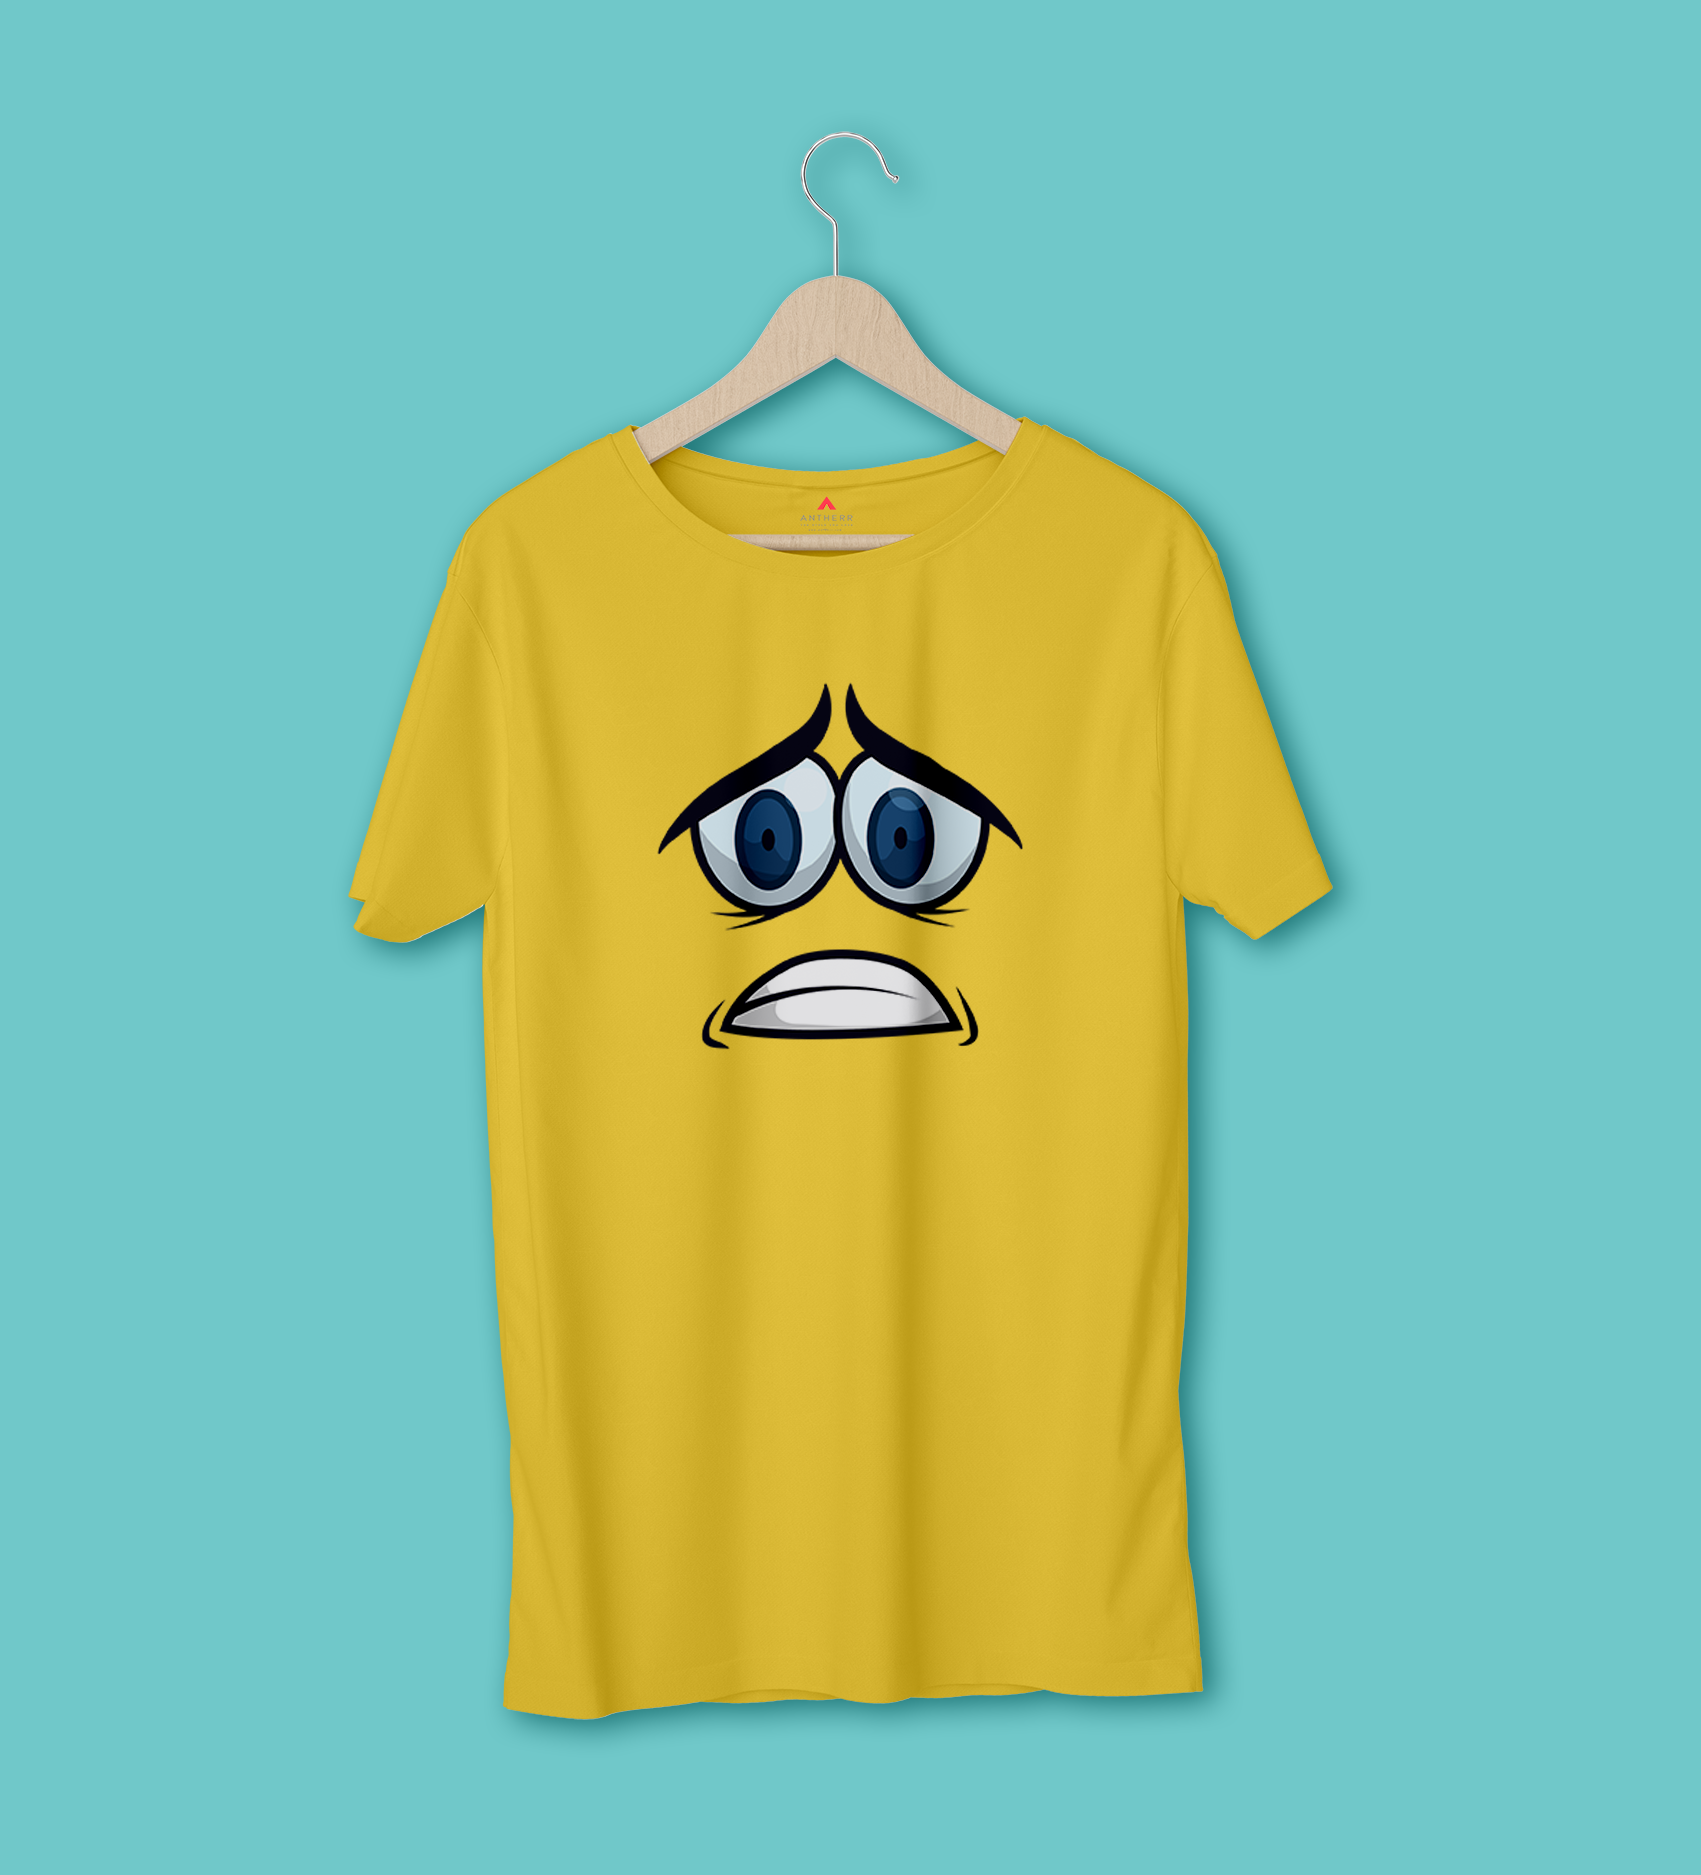 SCARED EXPRESSION HALF-SLEEVE T-SHIRTS (YELLOW) BLACK